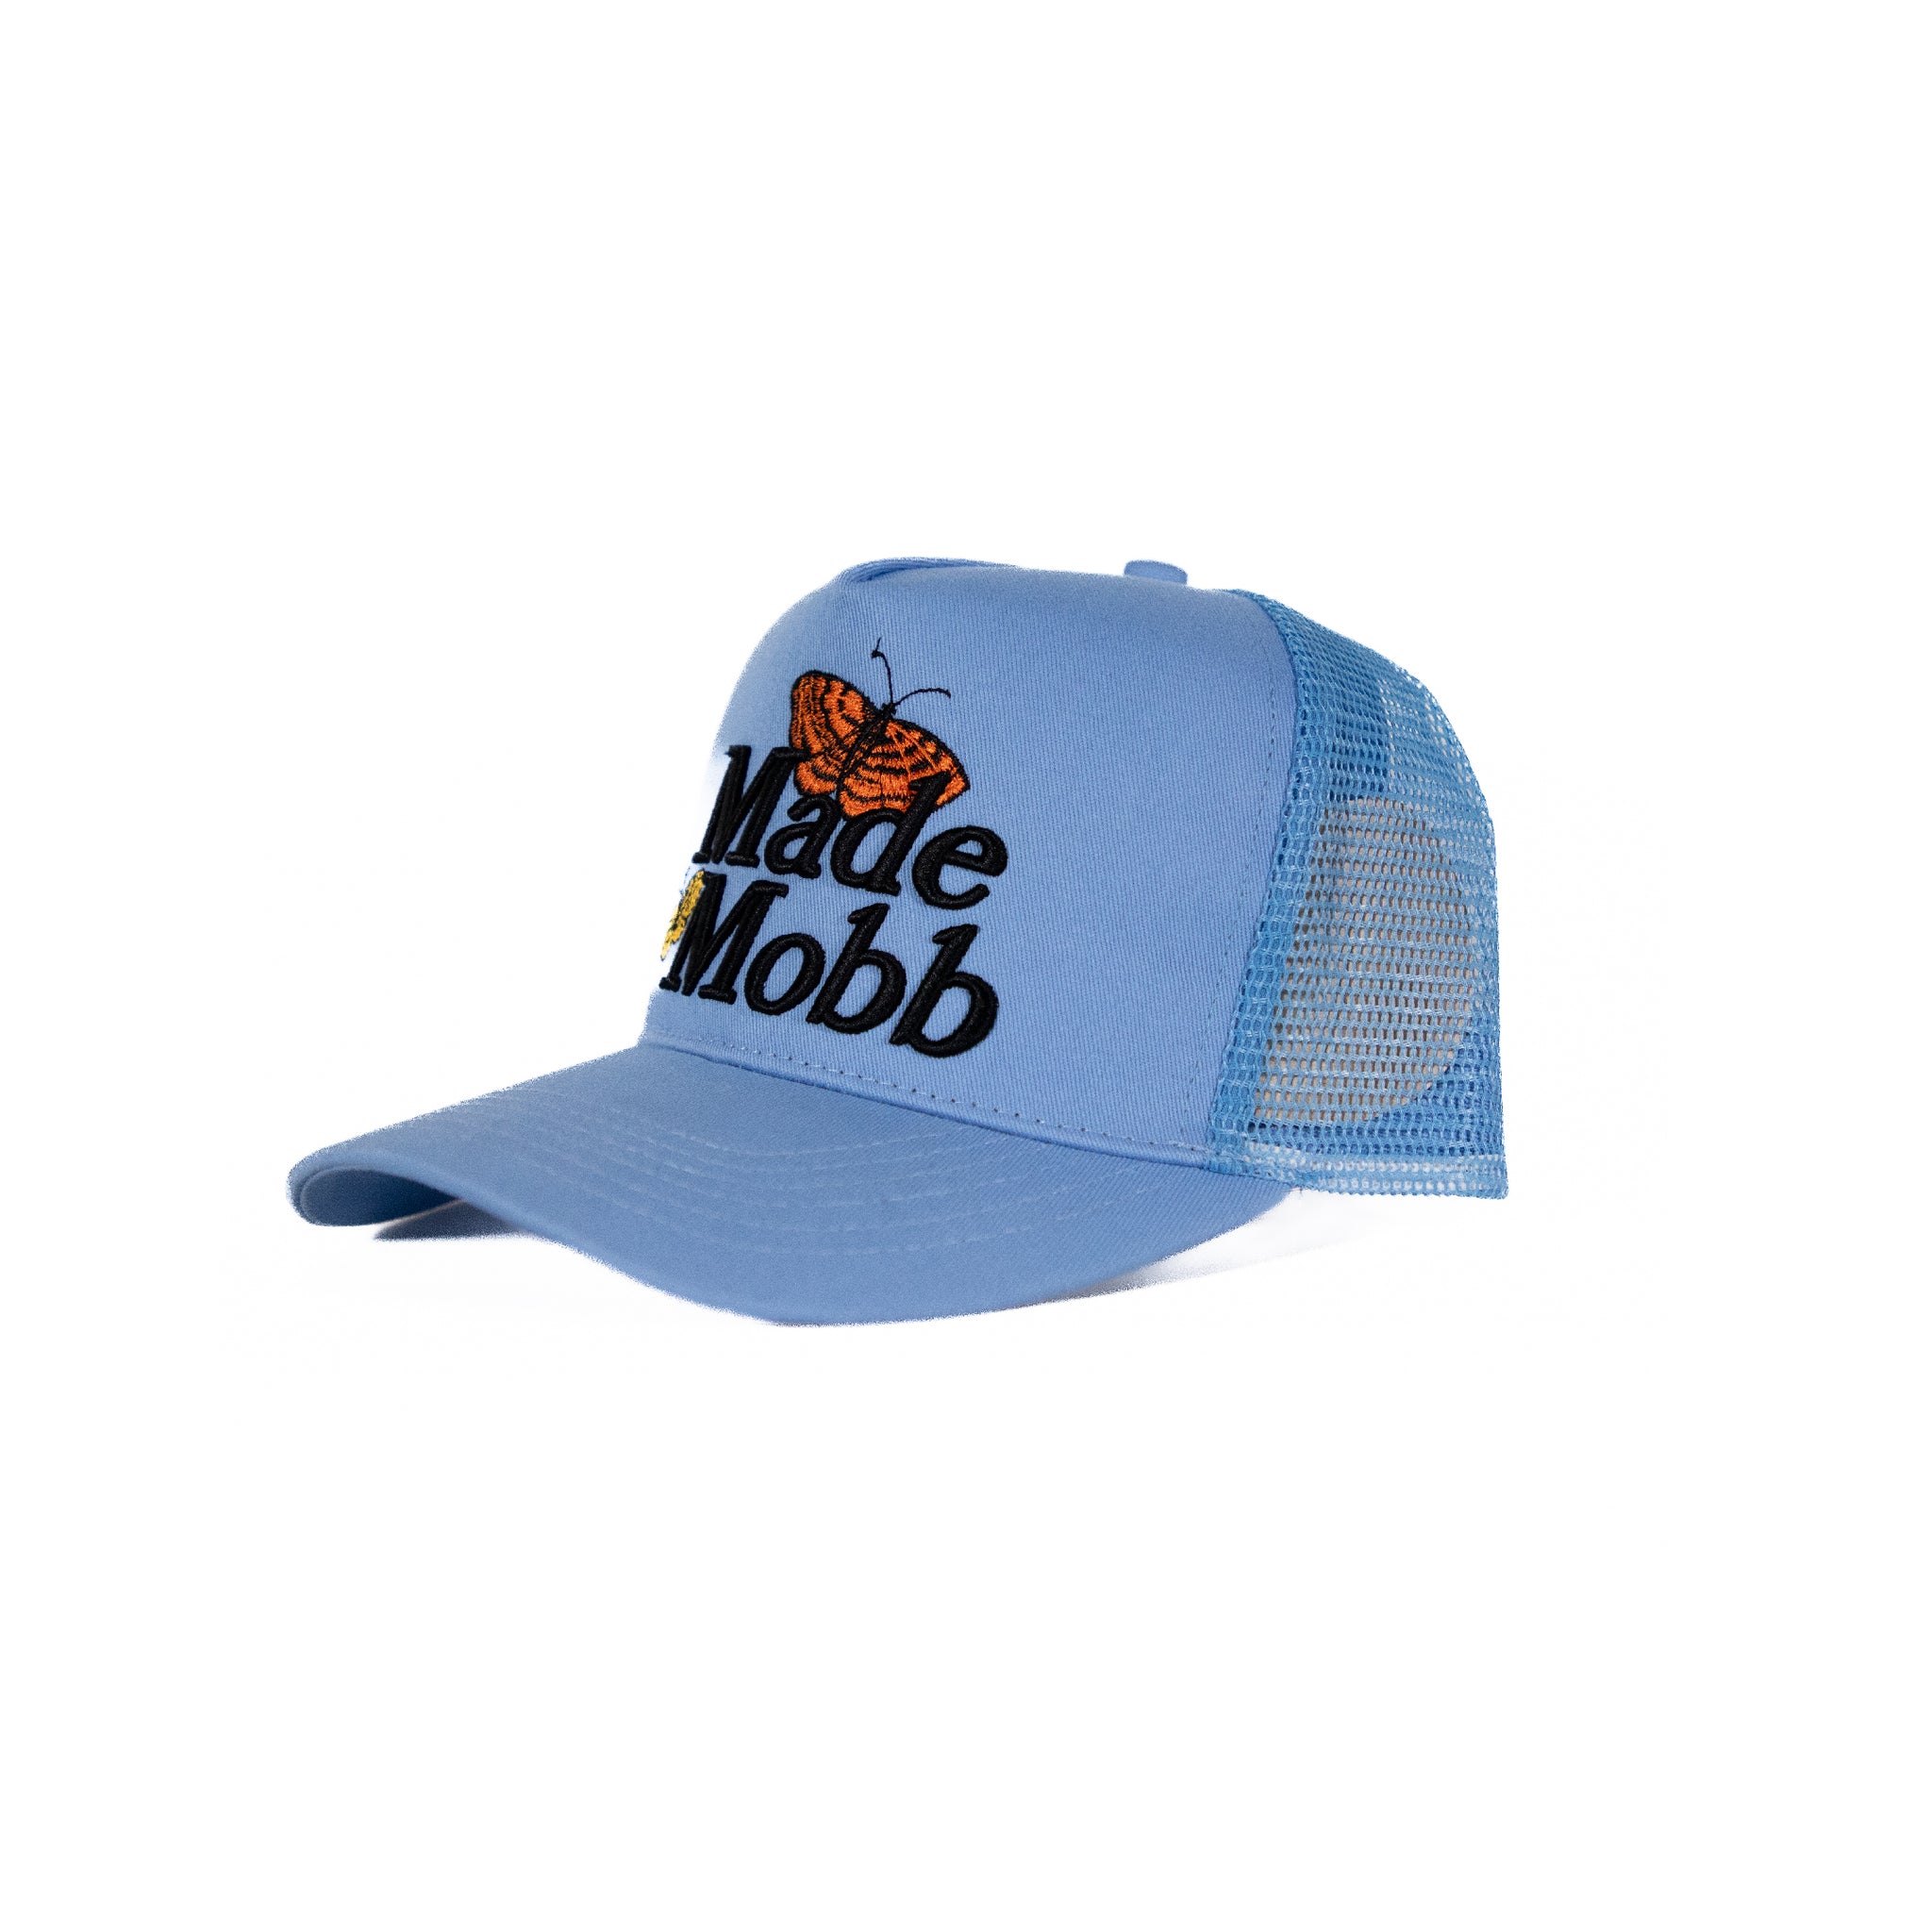 MADE MOBB Butterfly Mesh Hat - Sky Blue